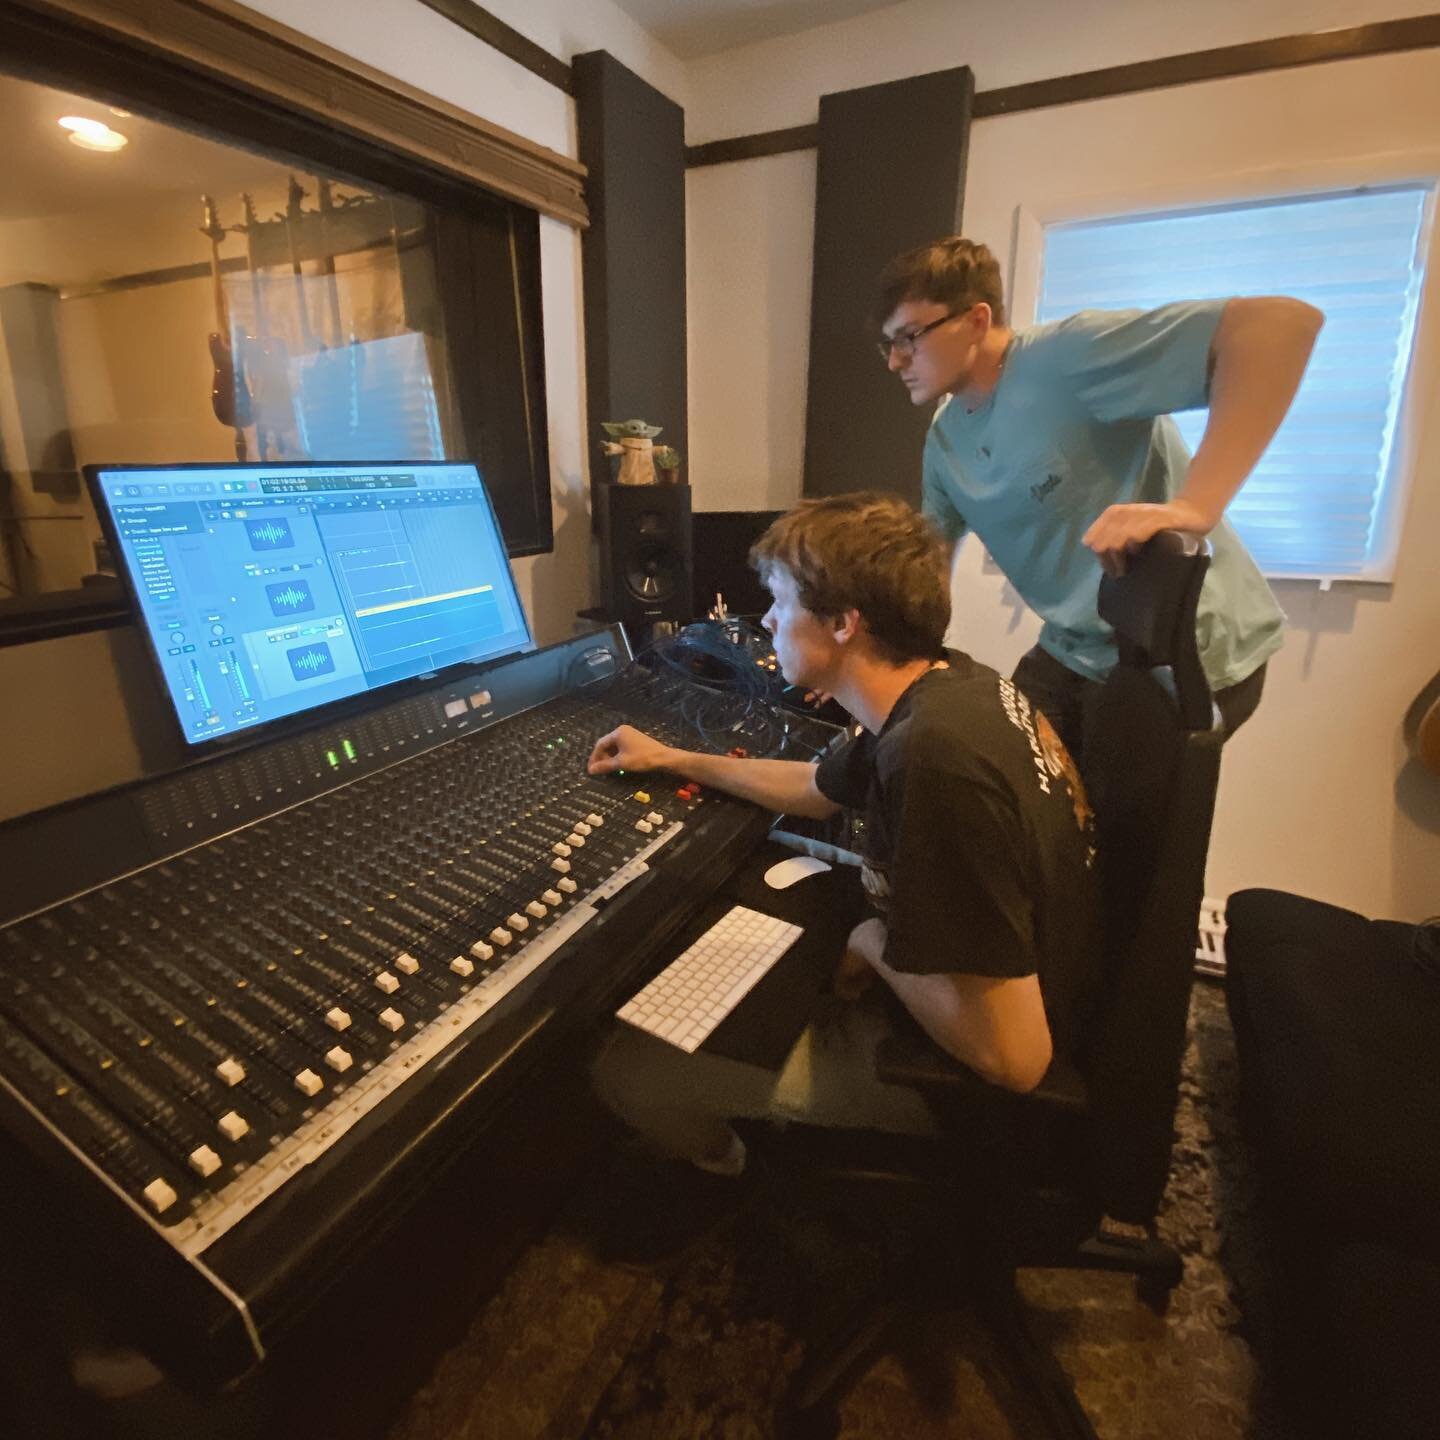 @sparaciomusic cooking up another banger with @rangelifeband. Who&rsquo;s been streaming Christian&rsquo;s &ldquo;I Melt With You&rdquo; cover? 🙋🏻&zwj;♀️ 🙋🏻 
.
.
.
.
.
.
#coversong #newmusic #indiemusic #indiemusician #njmusician #recordingstudio